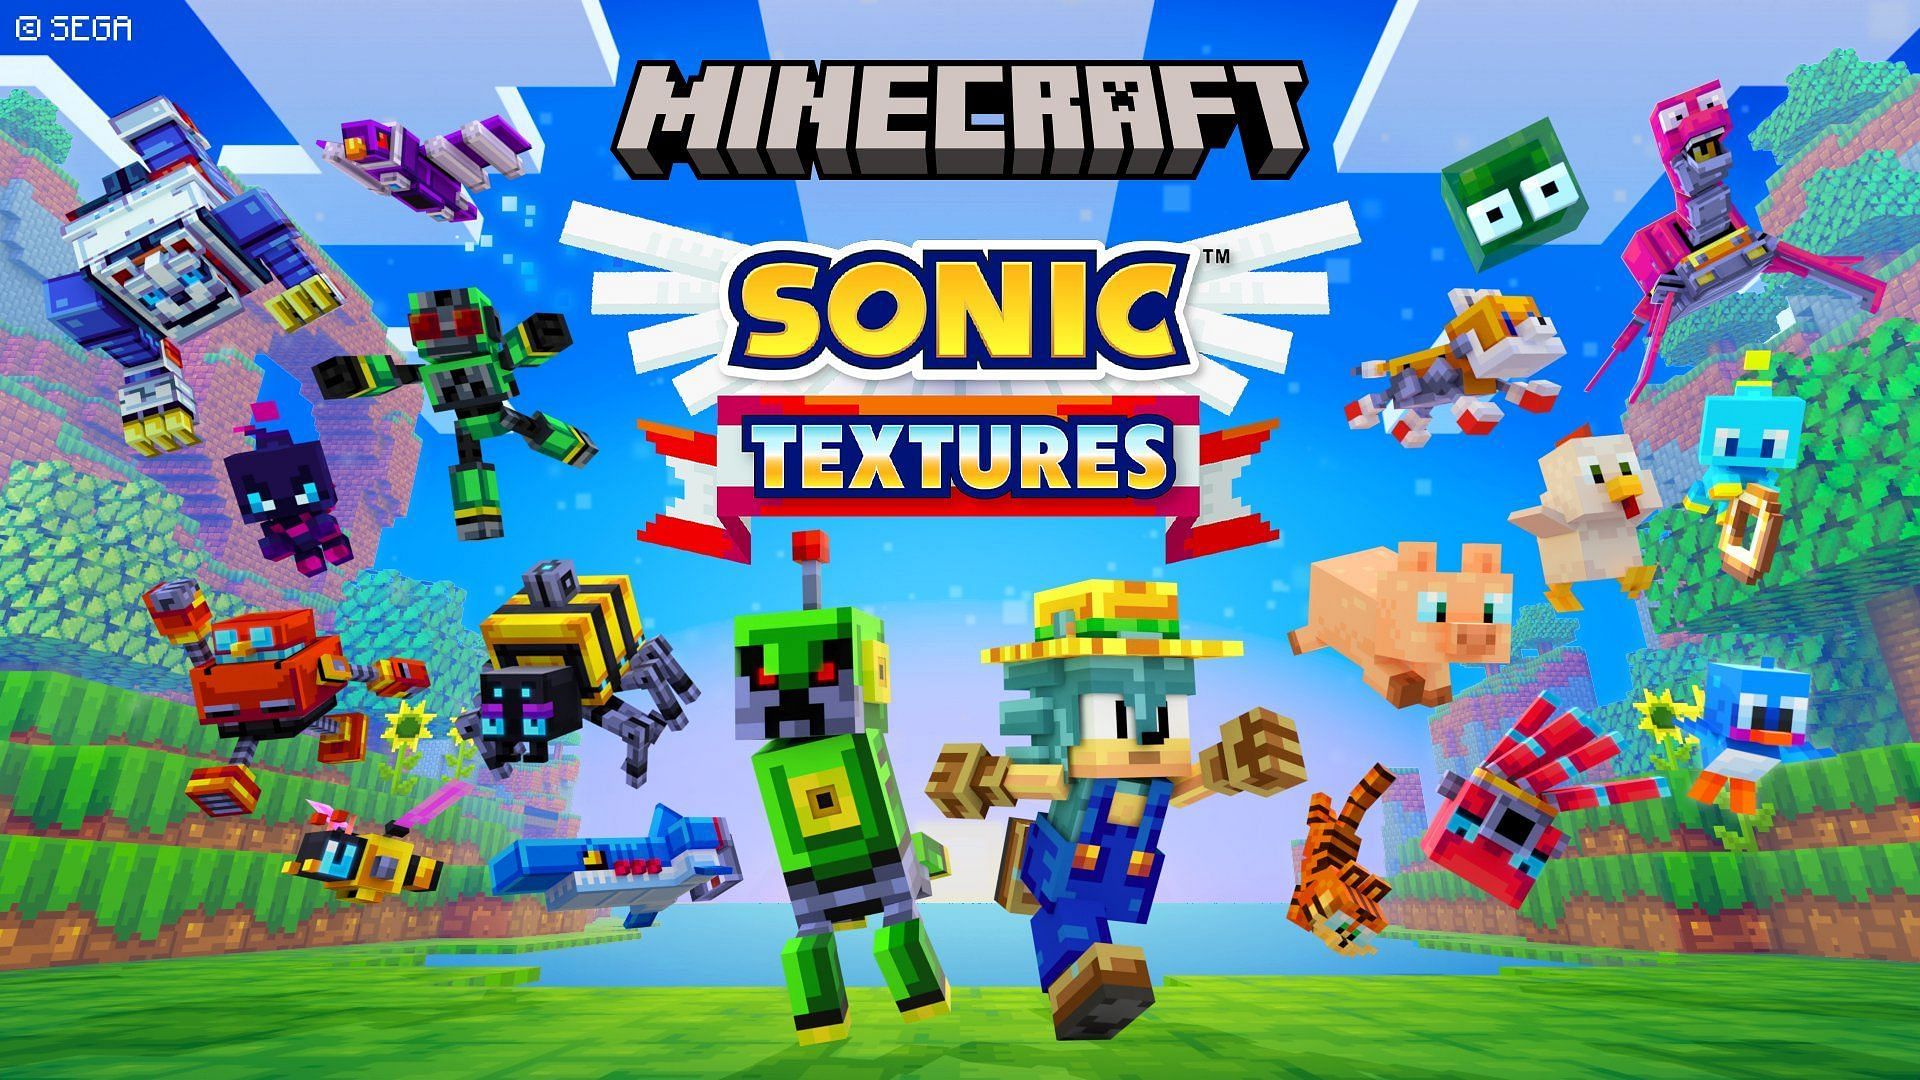 Mojang has released a brand new Sonic texture pack for Minecraft Bedrock Edition (Image via Mojang)